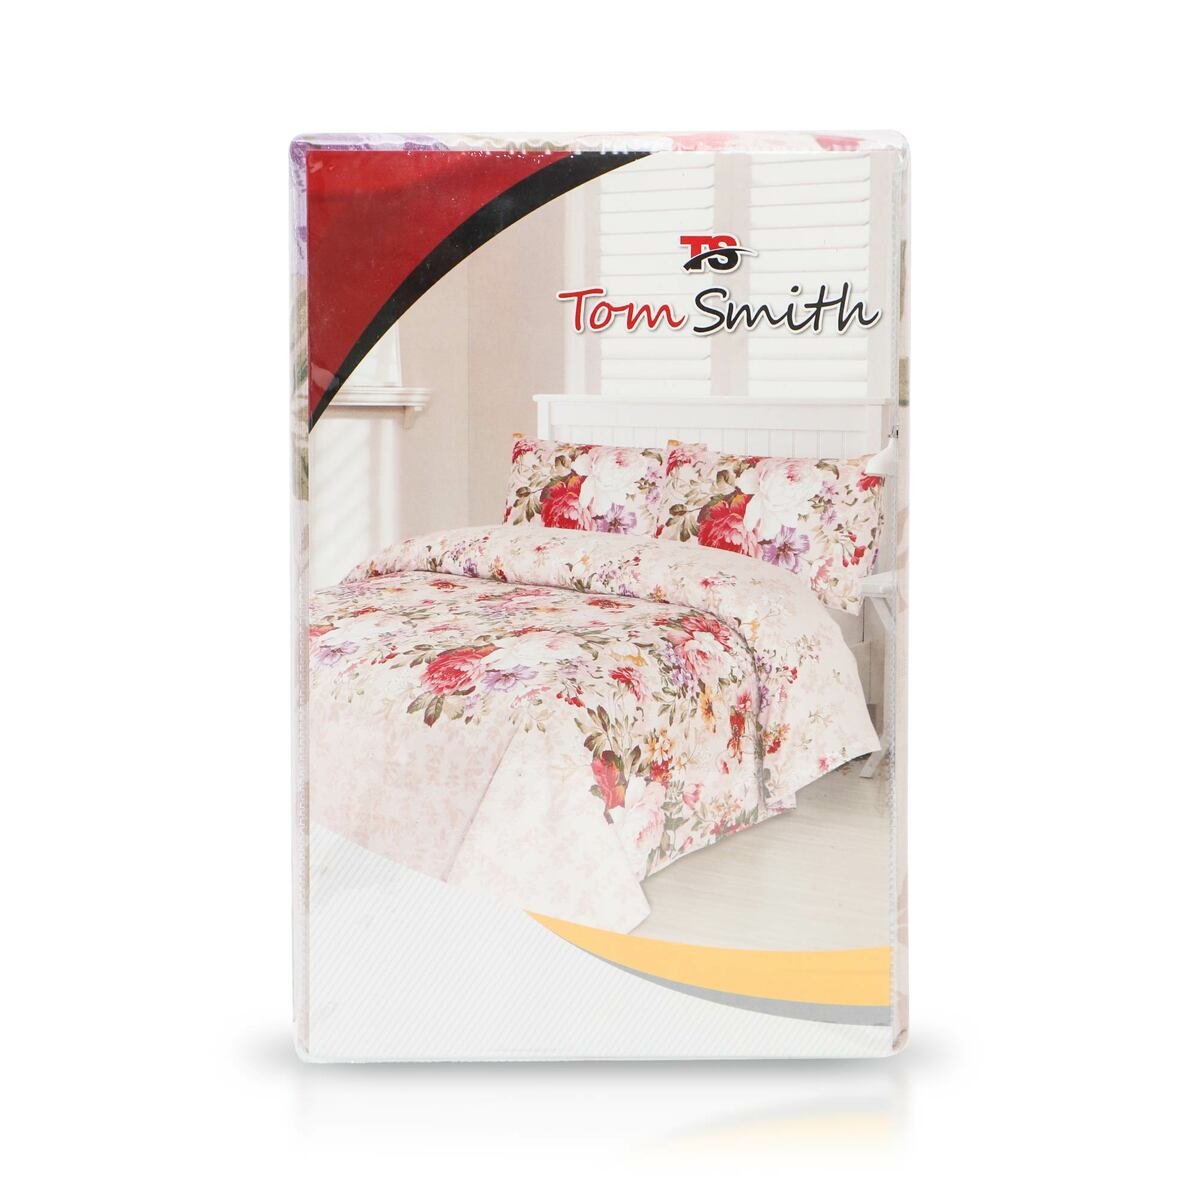 Tom Smith Bed Sheet Size: 150x240cm + Pillow Cover Flowers